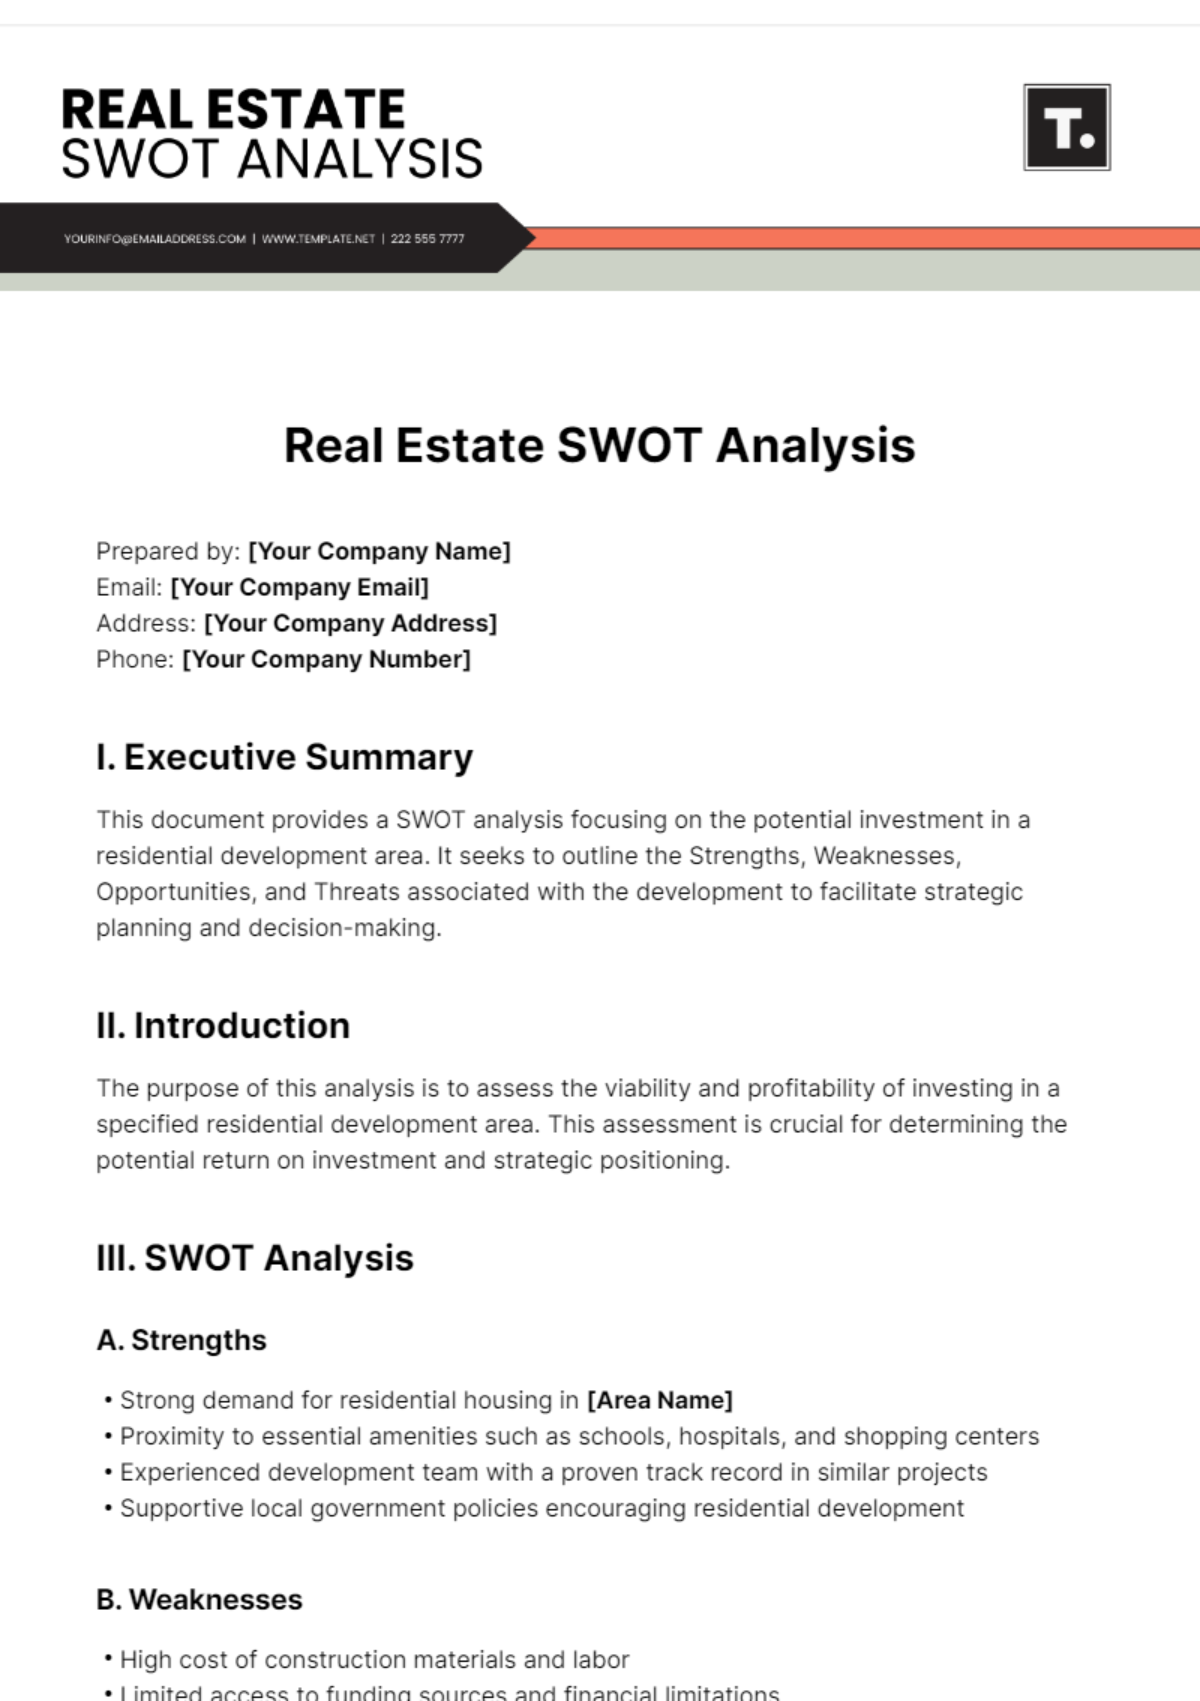 Free Real Estate SWOT Analysis Template